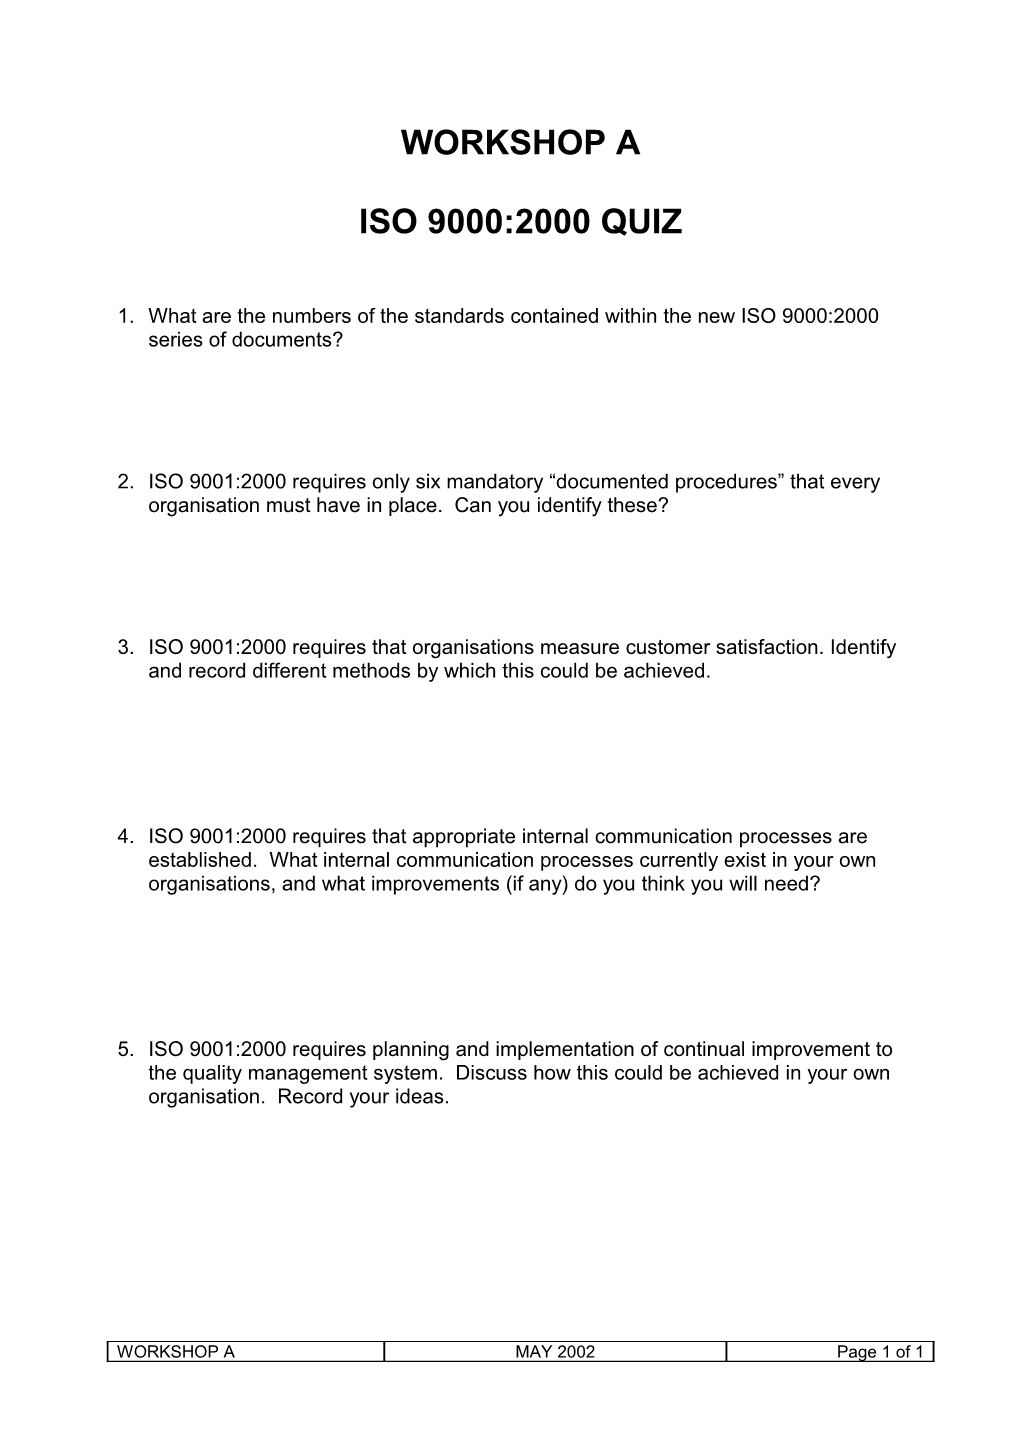 1. What Are the Numbers of the Standards Contained Within the New ISO 9000:2000 Series